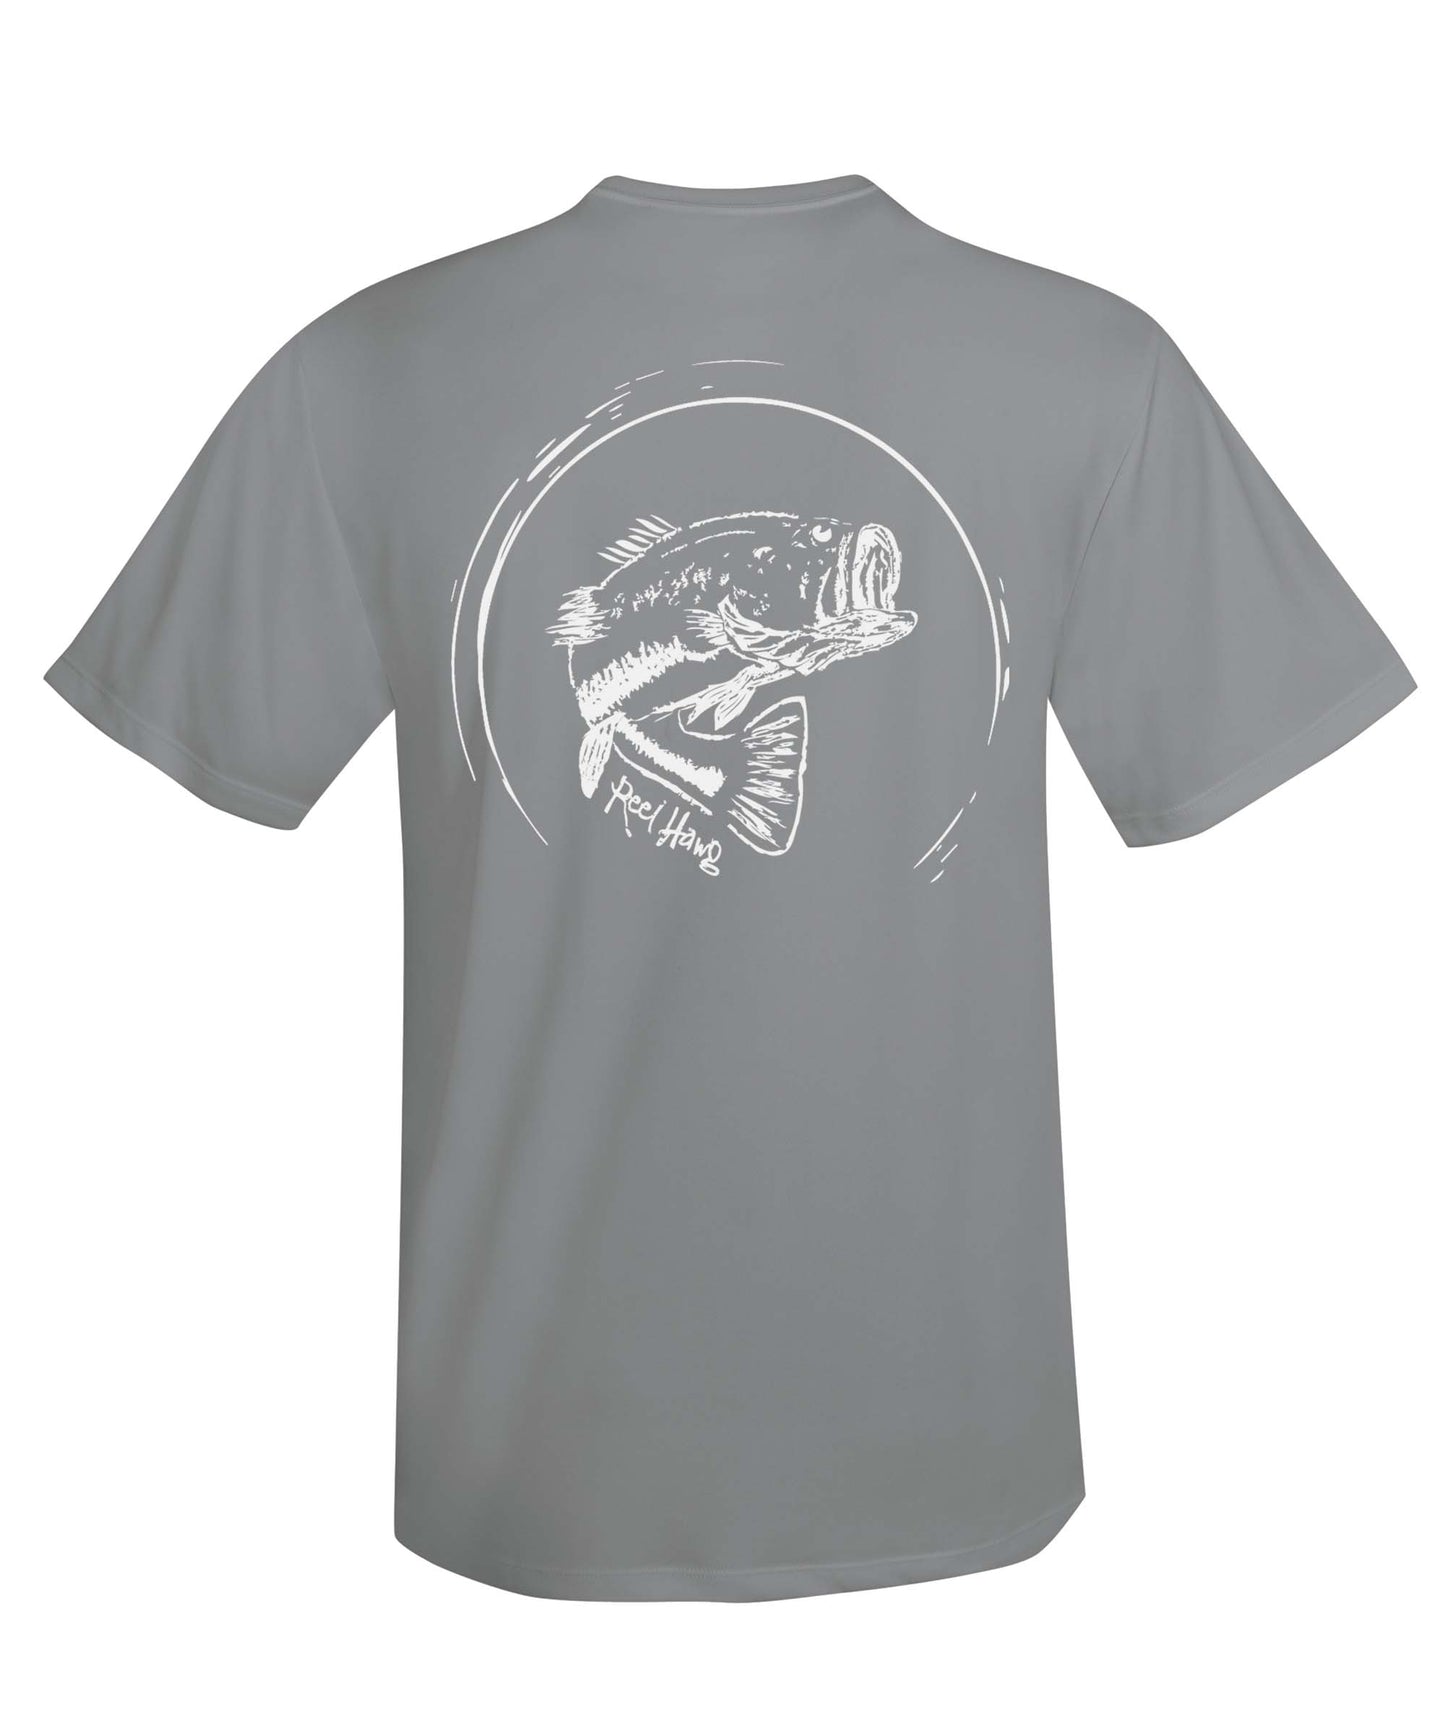 Bass fishing "Reel Hawg" gray performance short sleeve shirt with 50+ UV sun protection by Reel Fishy